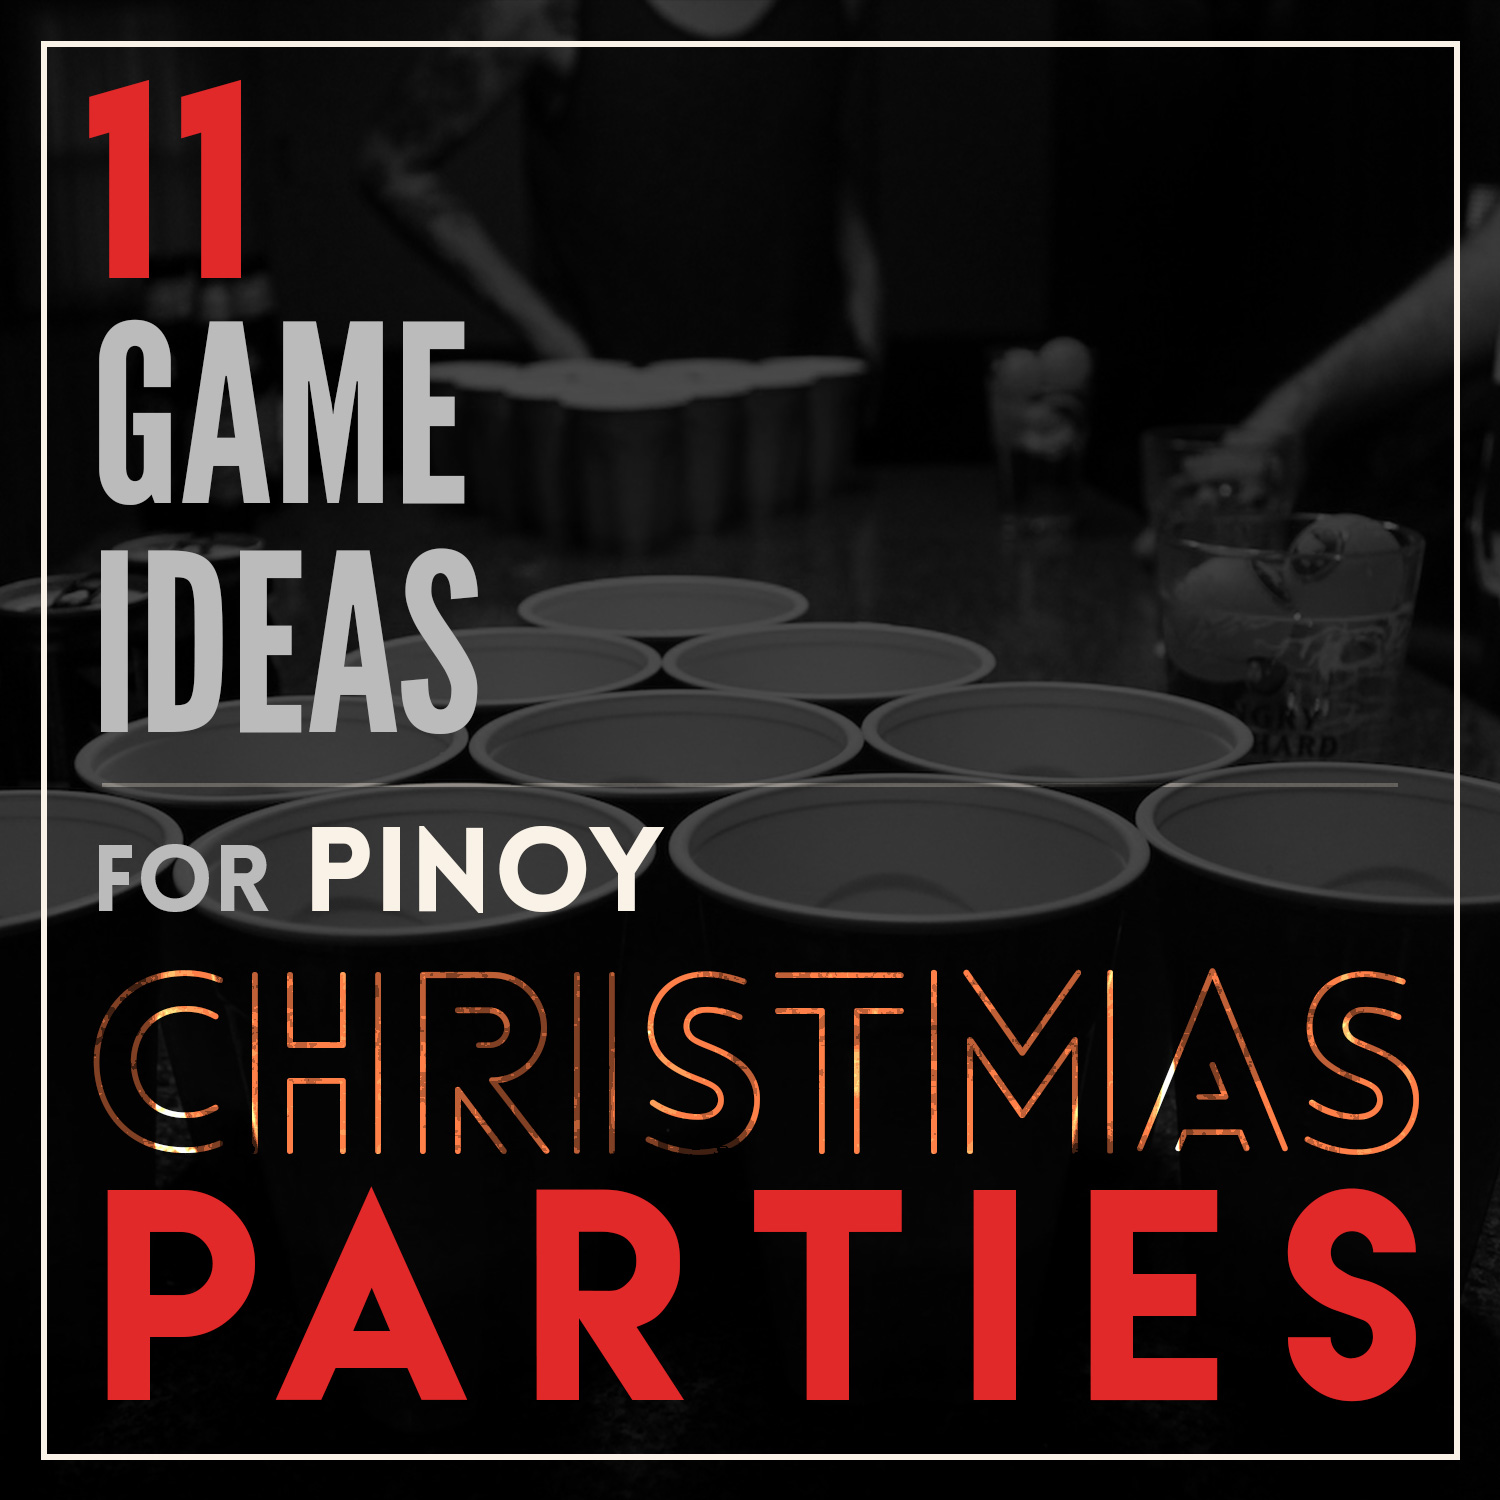 11 Game Ideas For Pinoy Christmas Parties Blog Professional Lights Sounds Red Damien